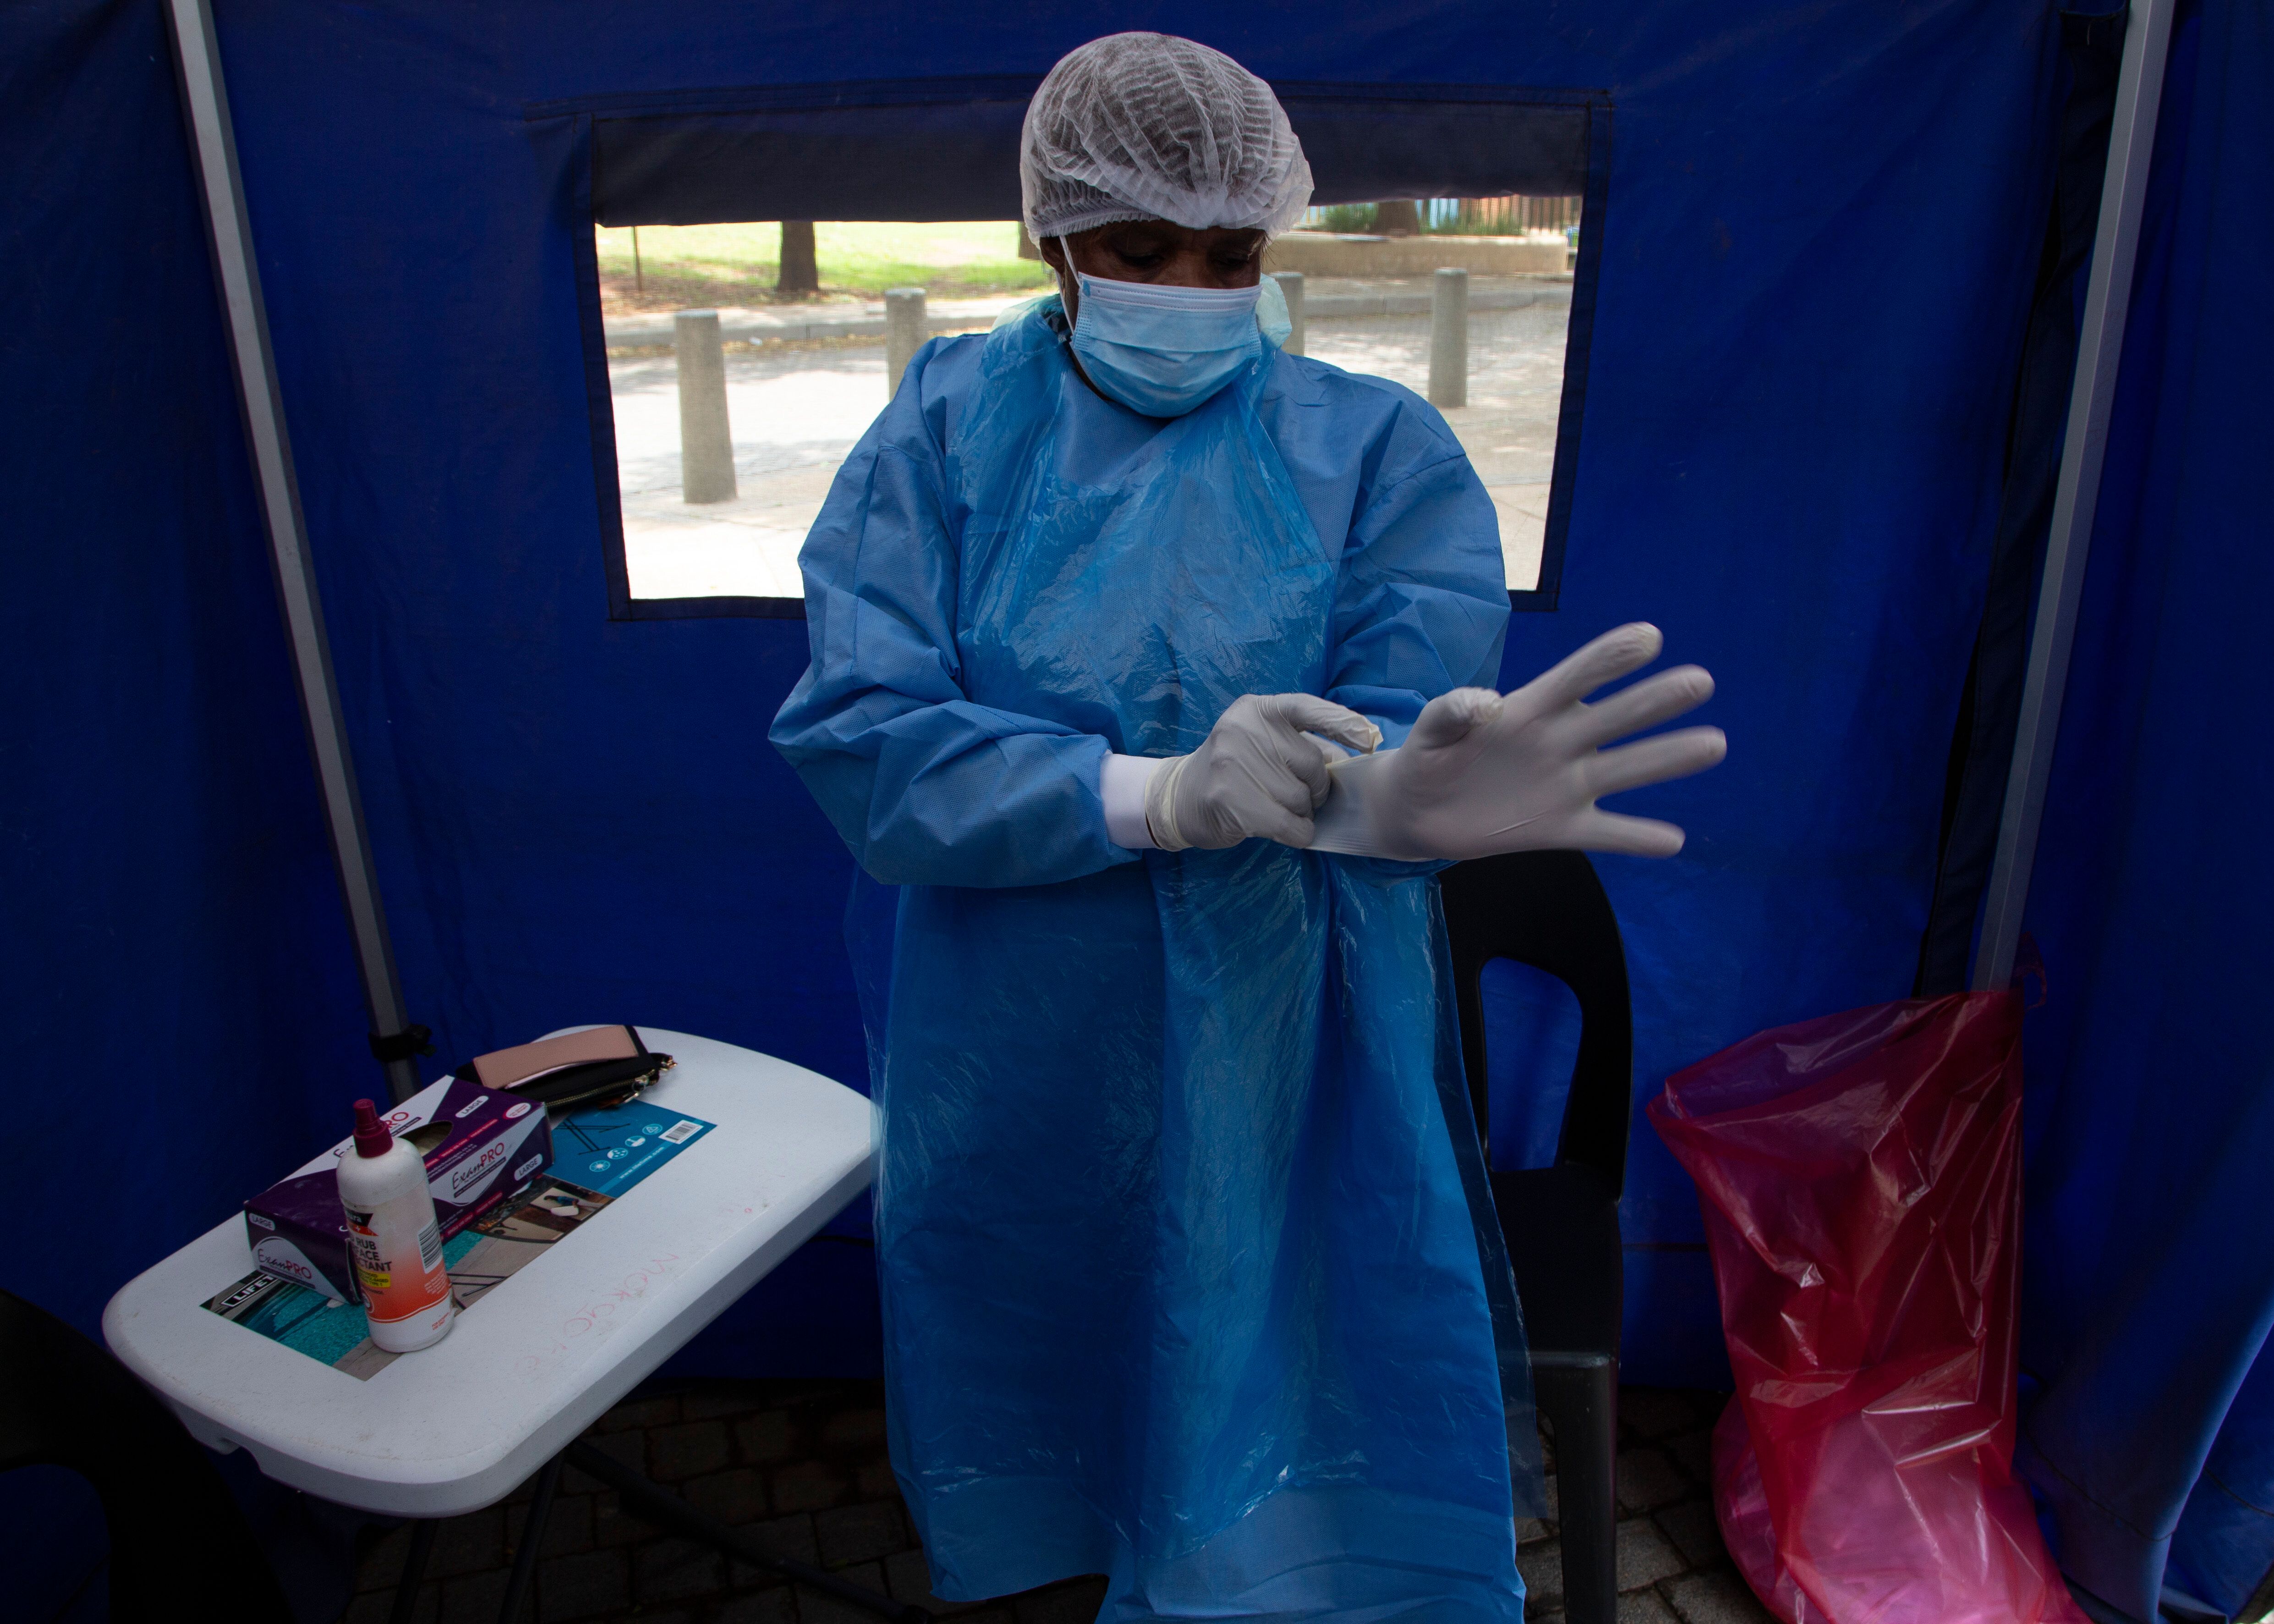 A healthcare worker prepares to test a person for COVID-19 at a facility in Soweto, South Africa, Wednesday Dec. 2, 2021. South Africa has accelerated its vaccination campaign by giving jabs at pop-up sites in shopping centers and transport hubs to combat the rapidly rising new cases of COVID-19.